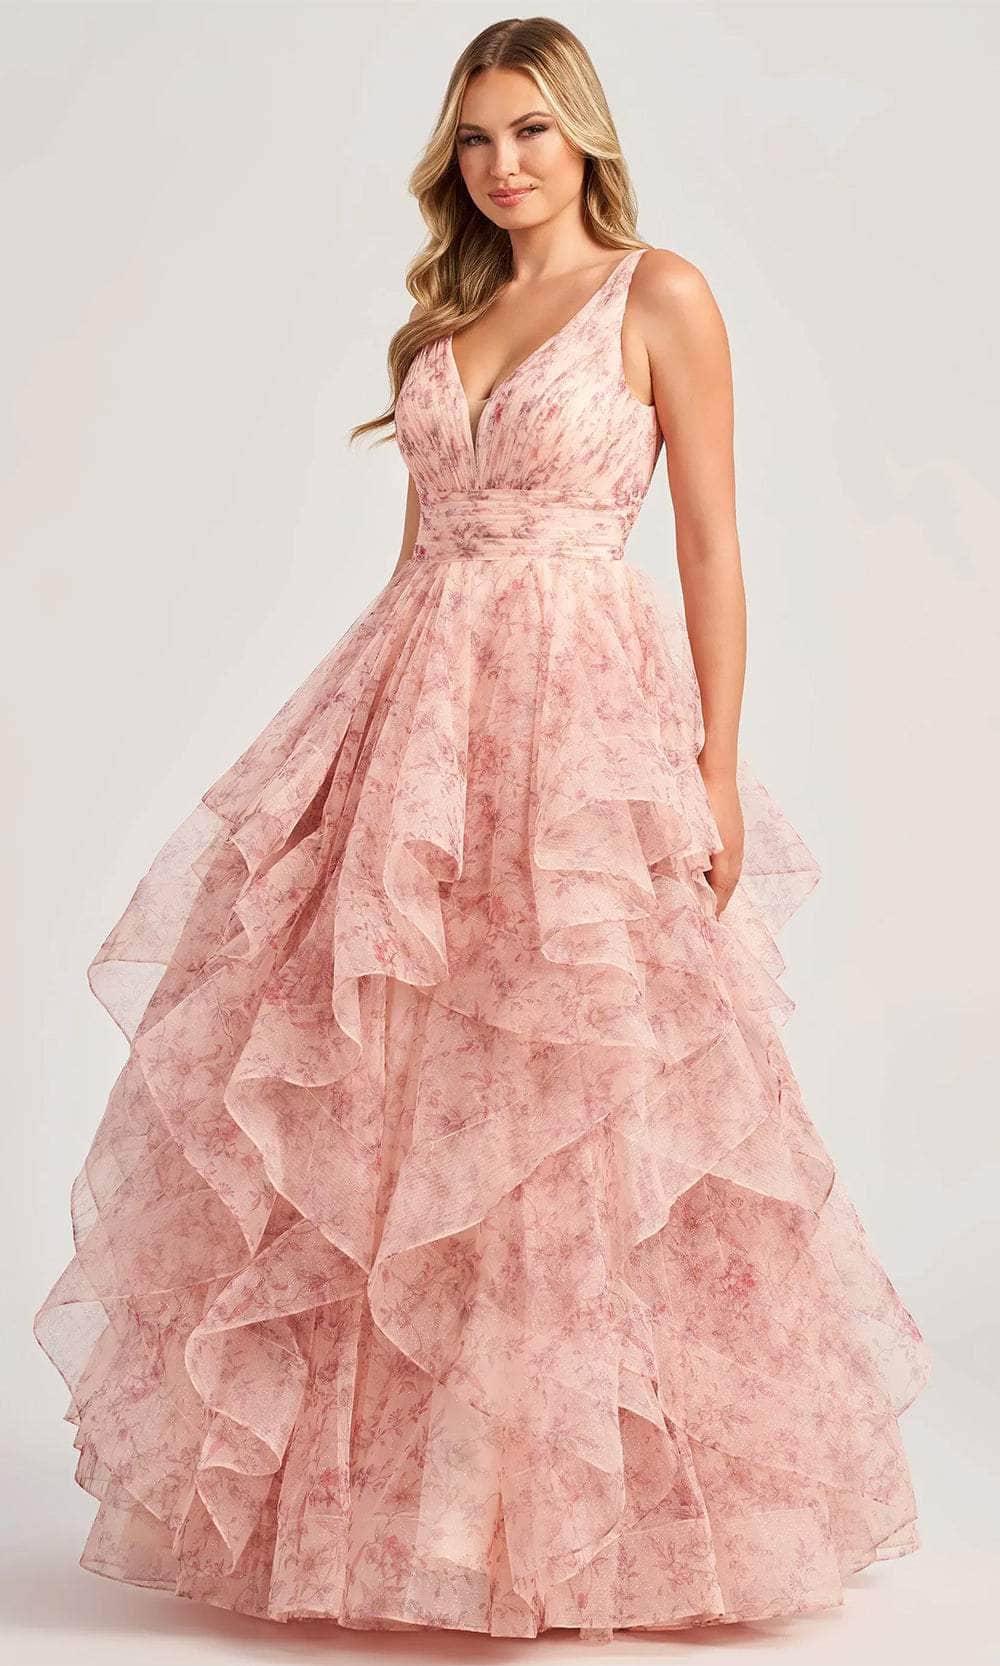 Image of Colette By Daphne CL5273 - Flounce Skirt Prom Dress